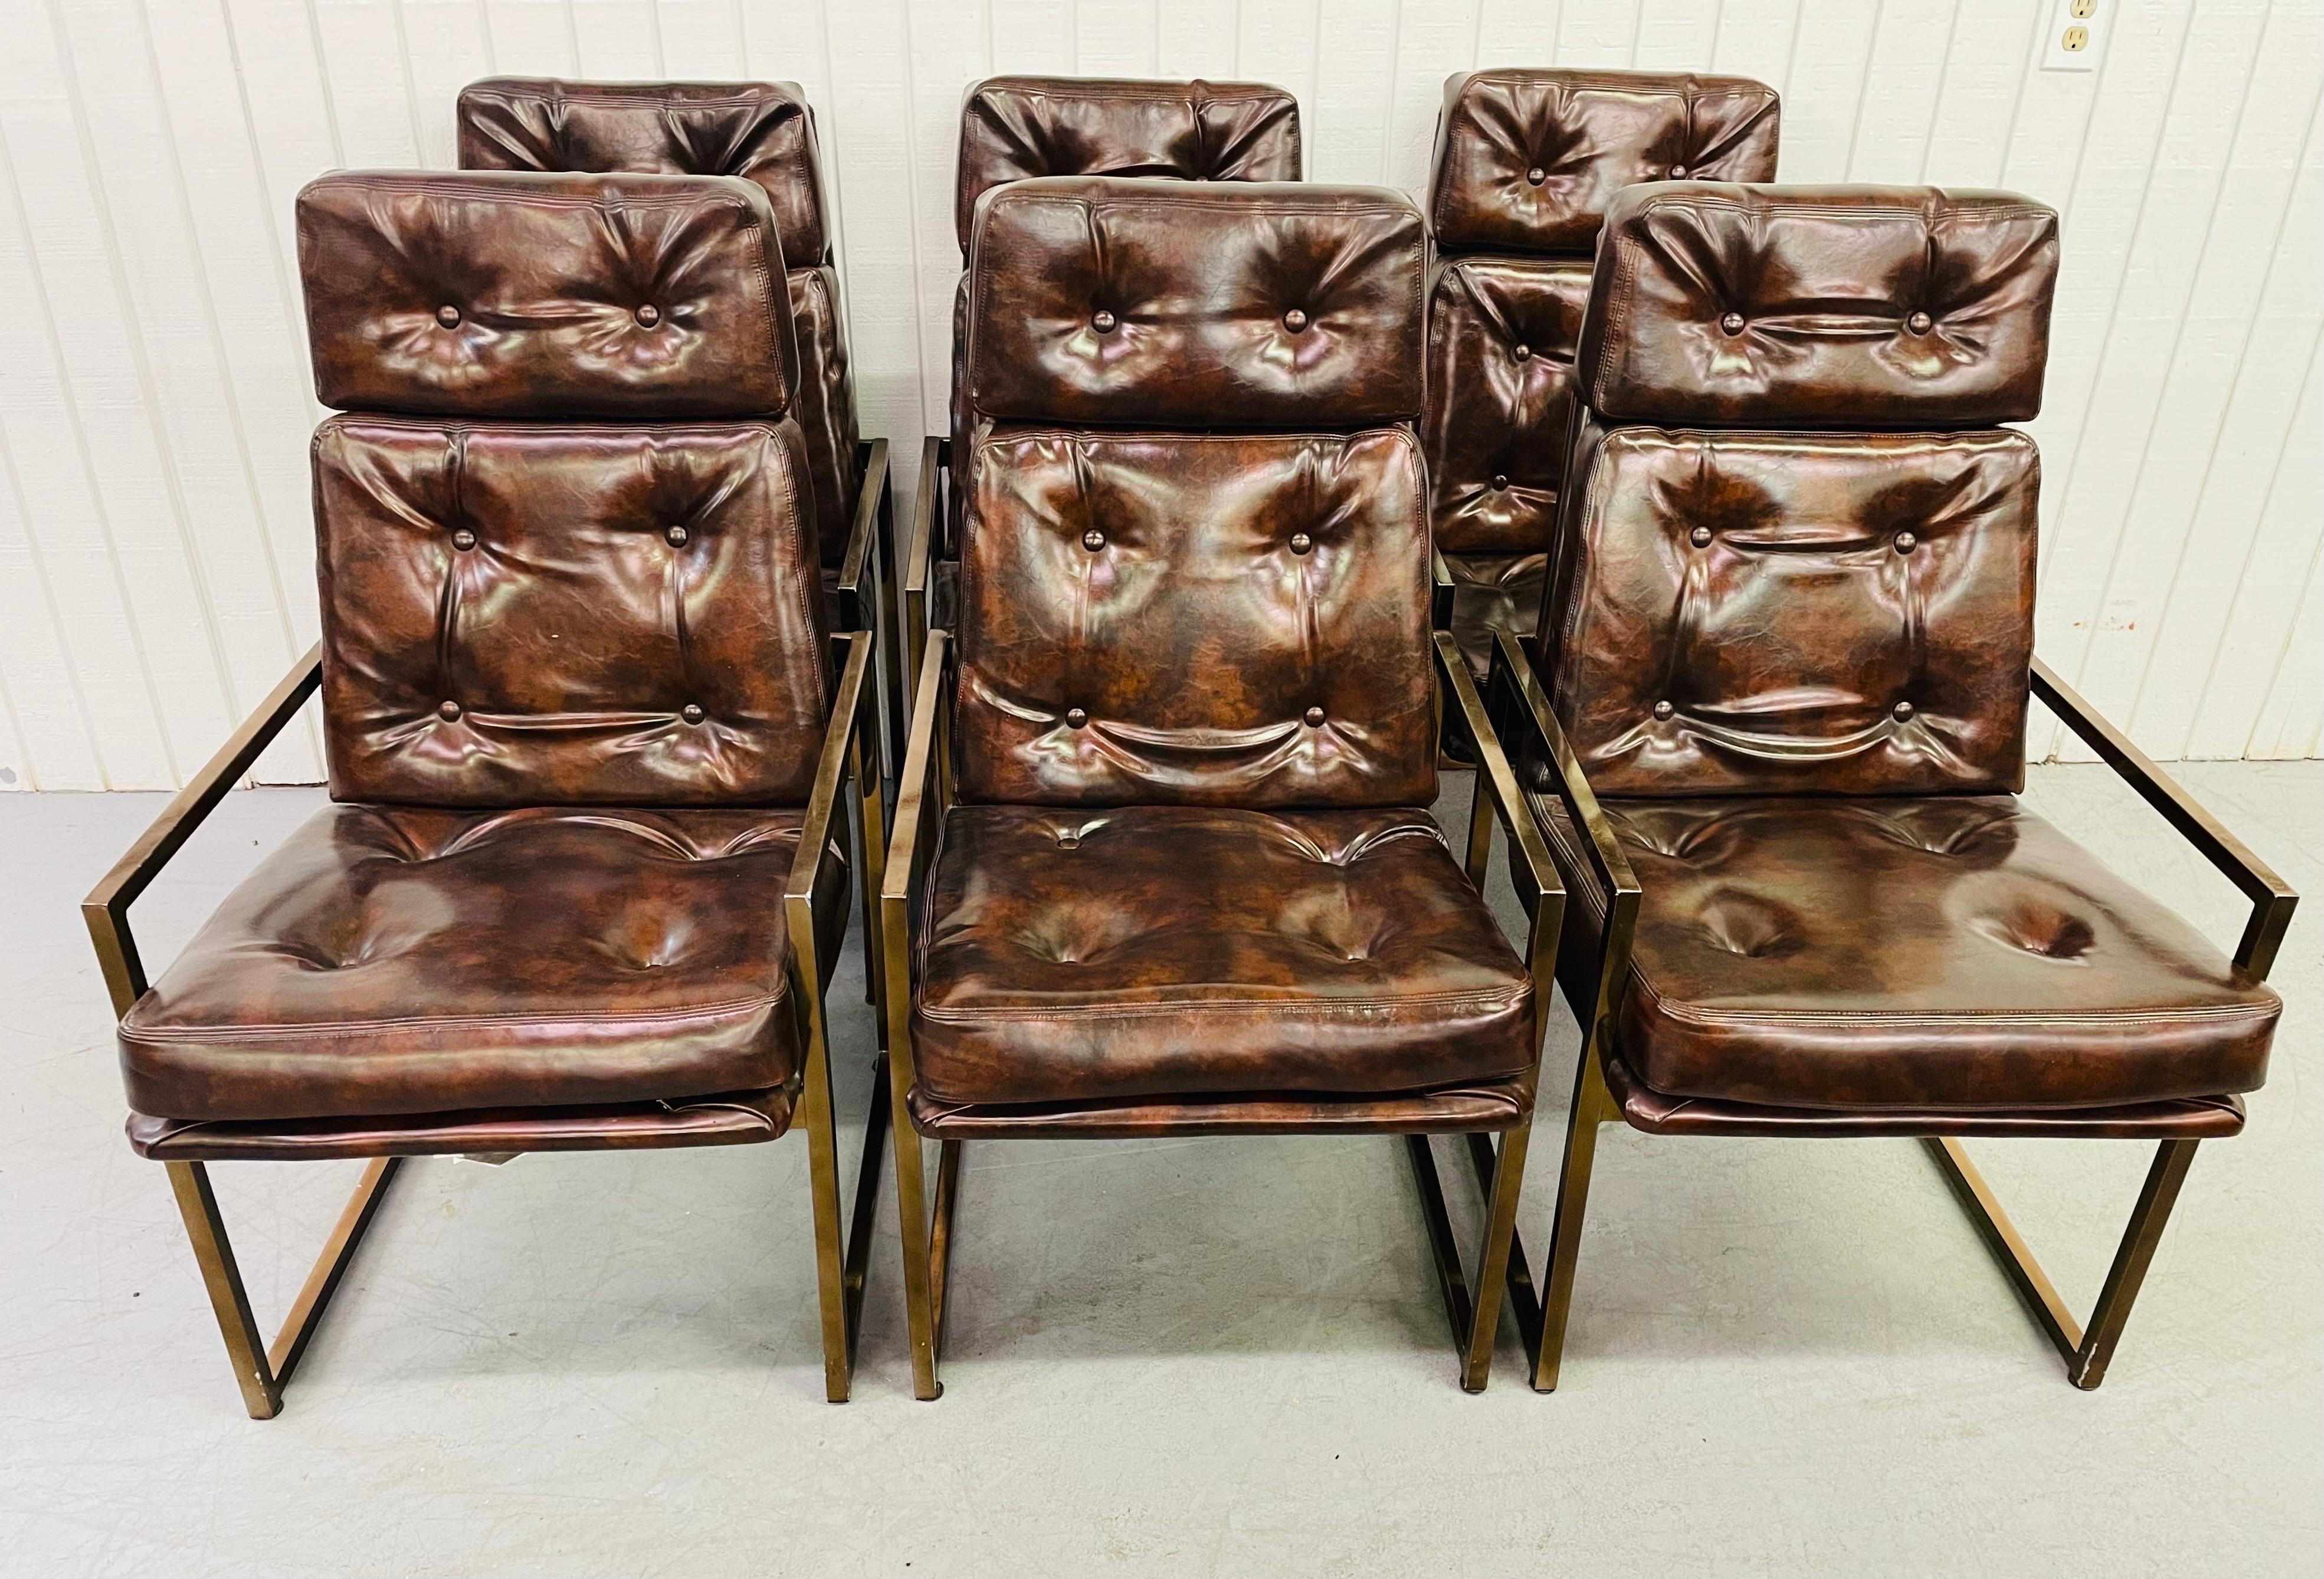 This listing is for a set of six 1980’s Chromcraft leather dining chairs. Featuring the original leather upholstery, tufted backs/seats, and bronze colored frames.